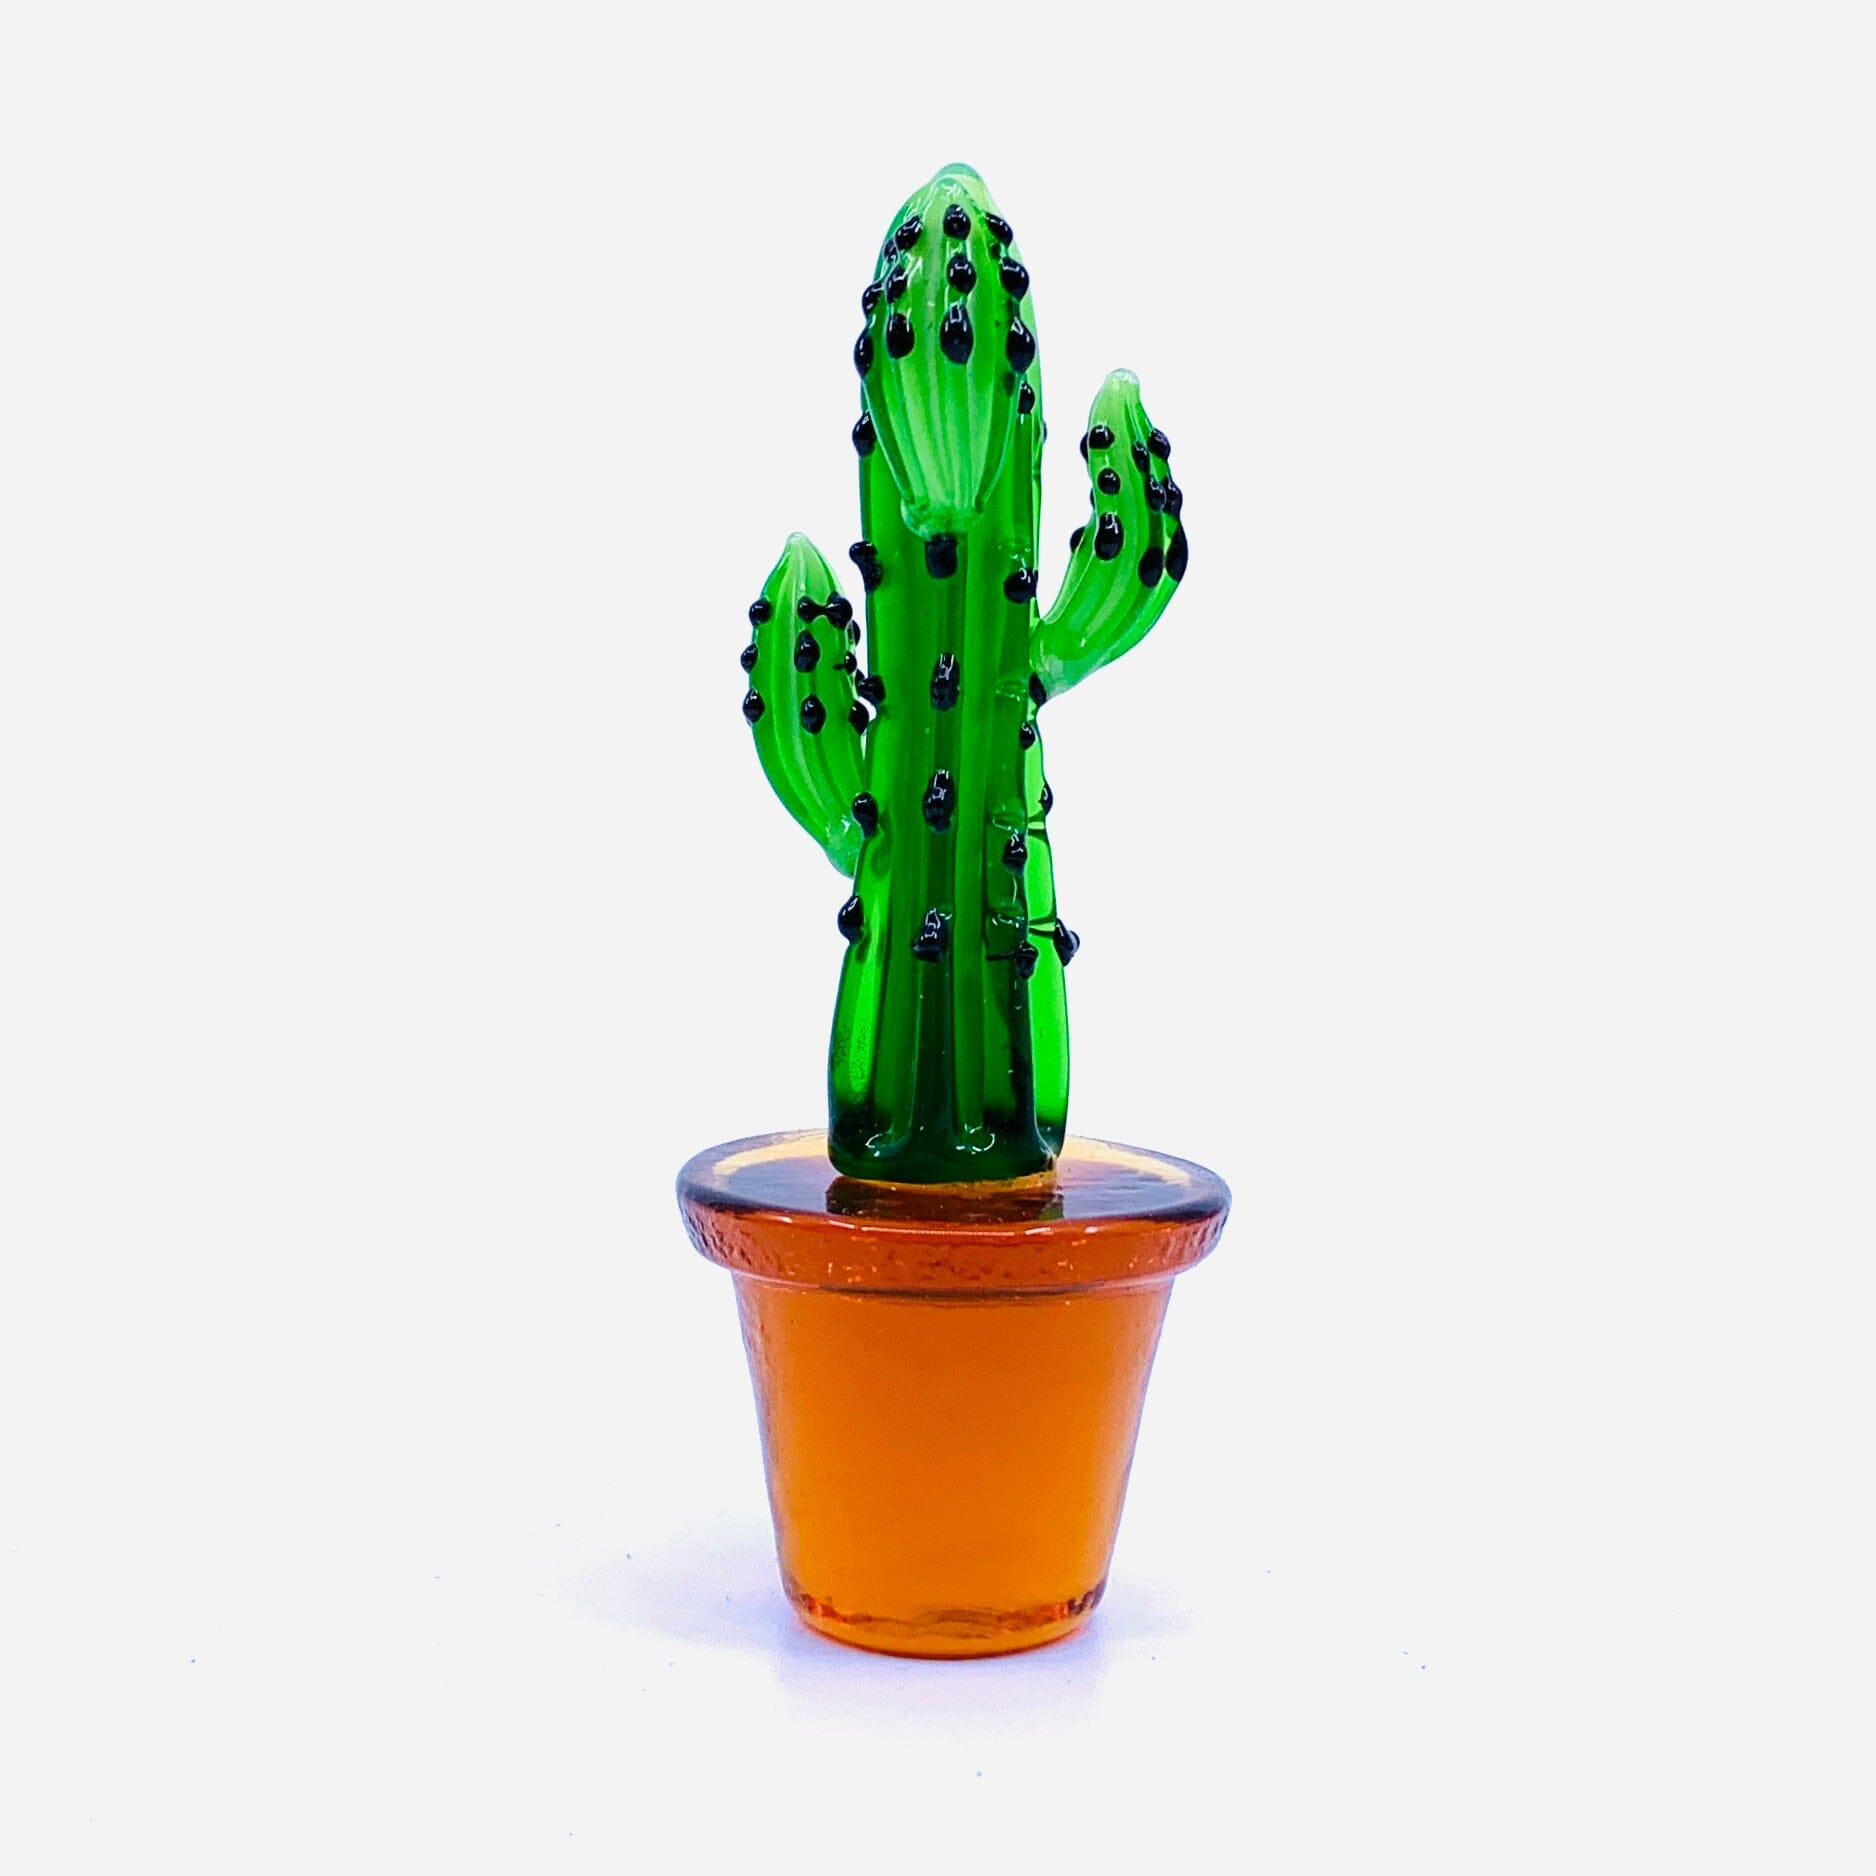 Emotional Support Pocket Cactus, 3 Miniature Dynasty 